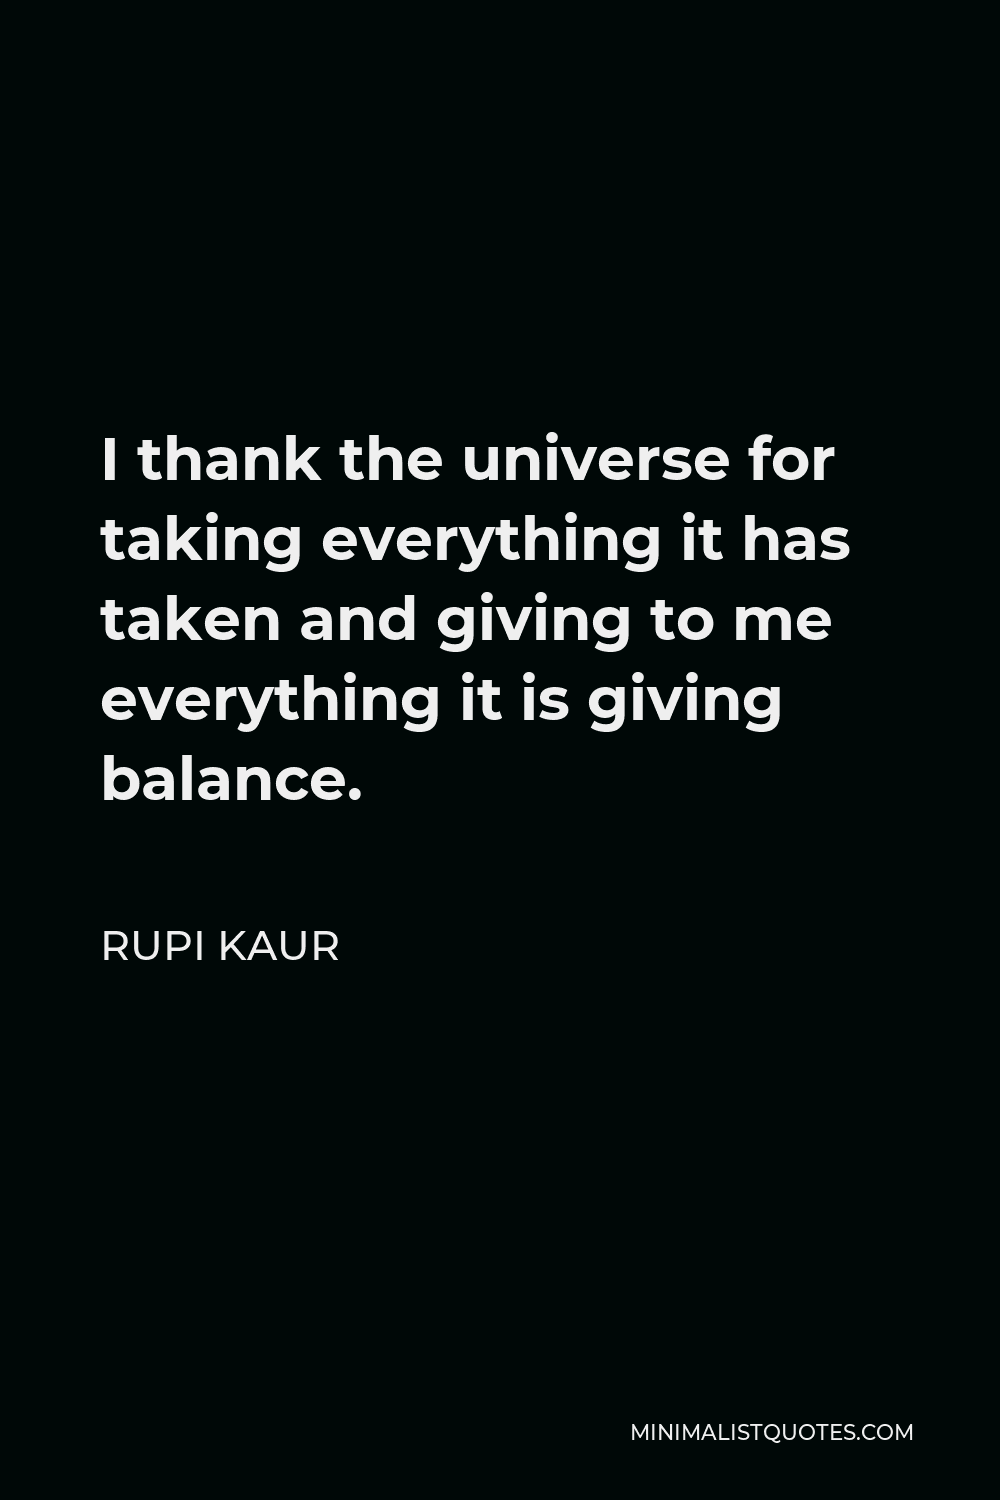 Rupi Kaur Quote - I thank the universe for taking everything it has taken and giving to me everything it is giving balance.